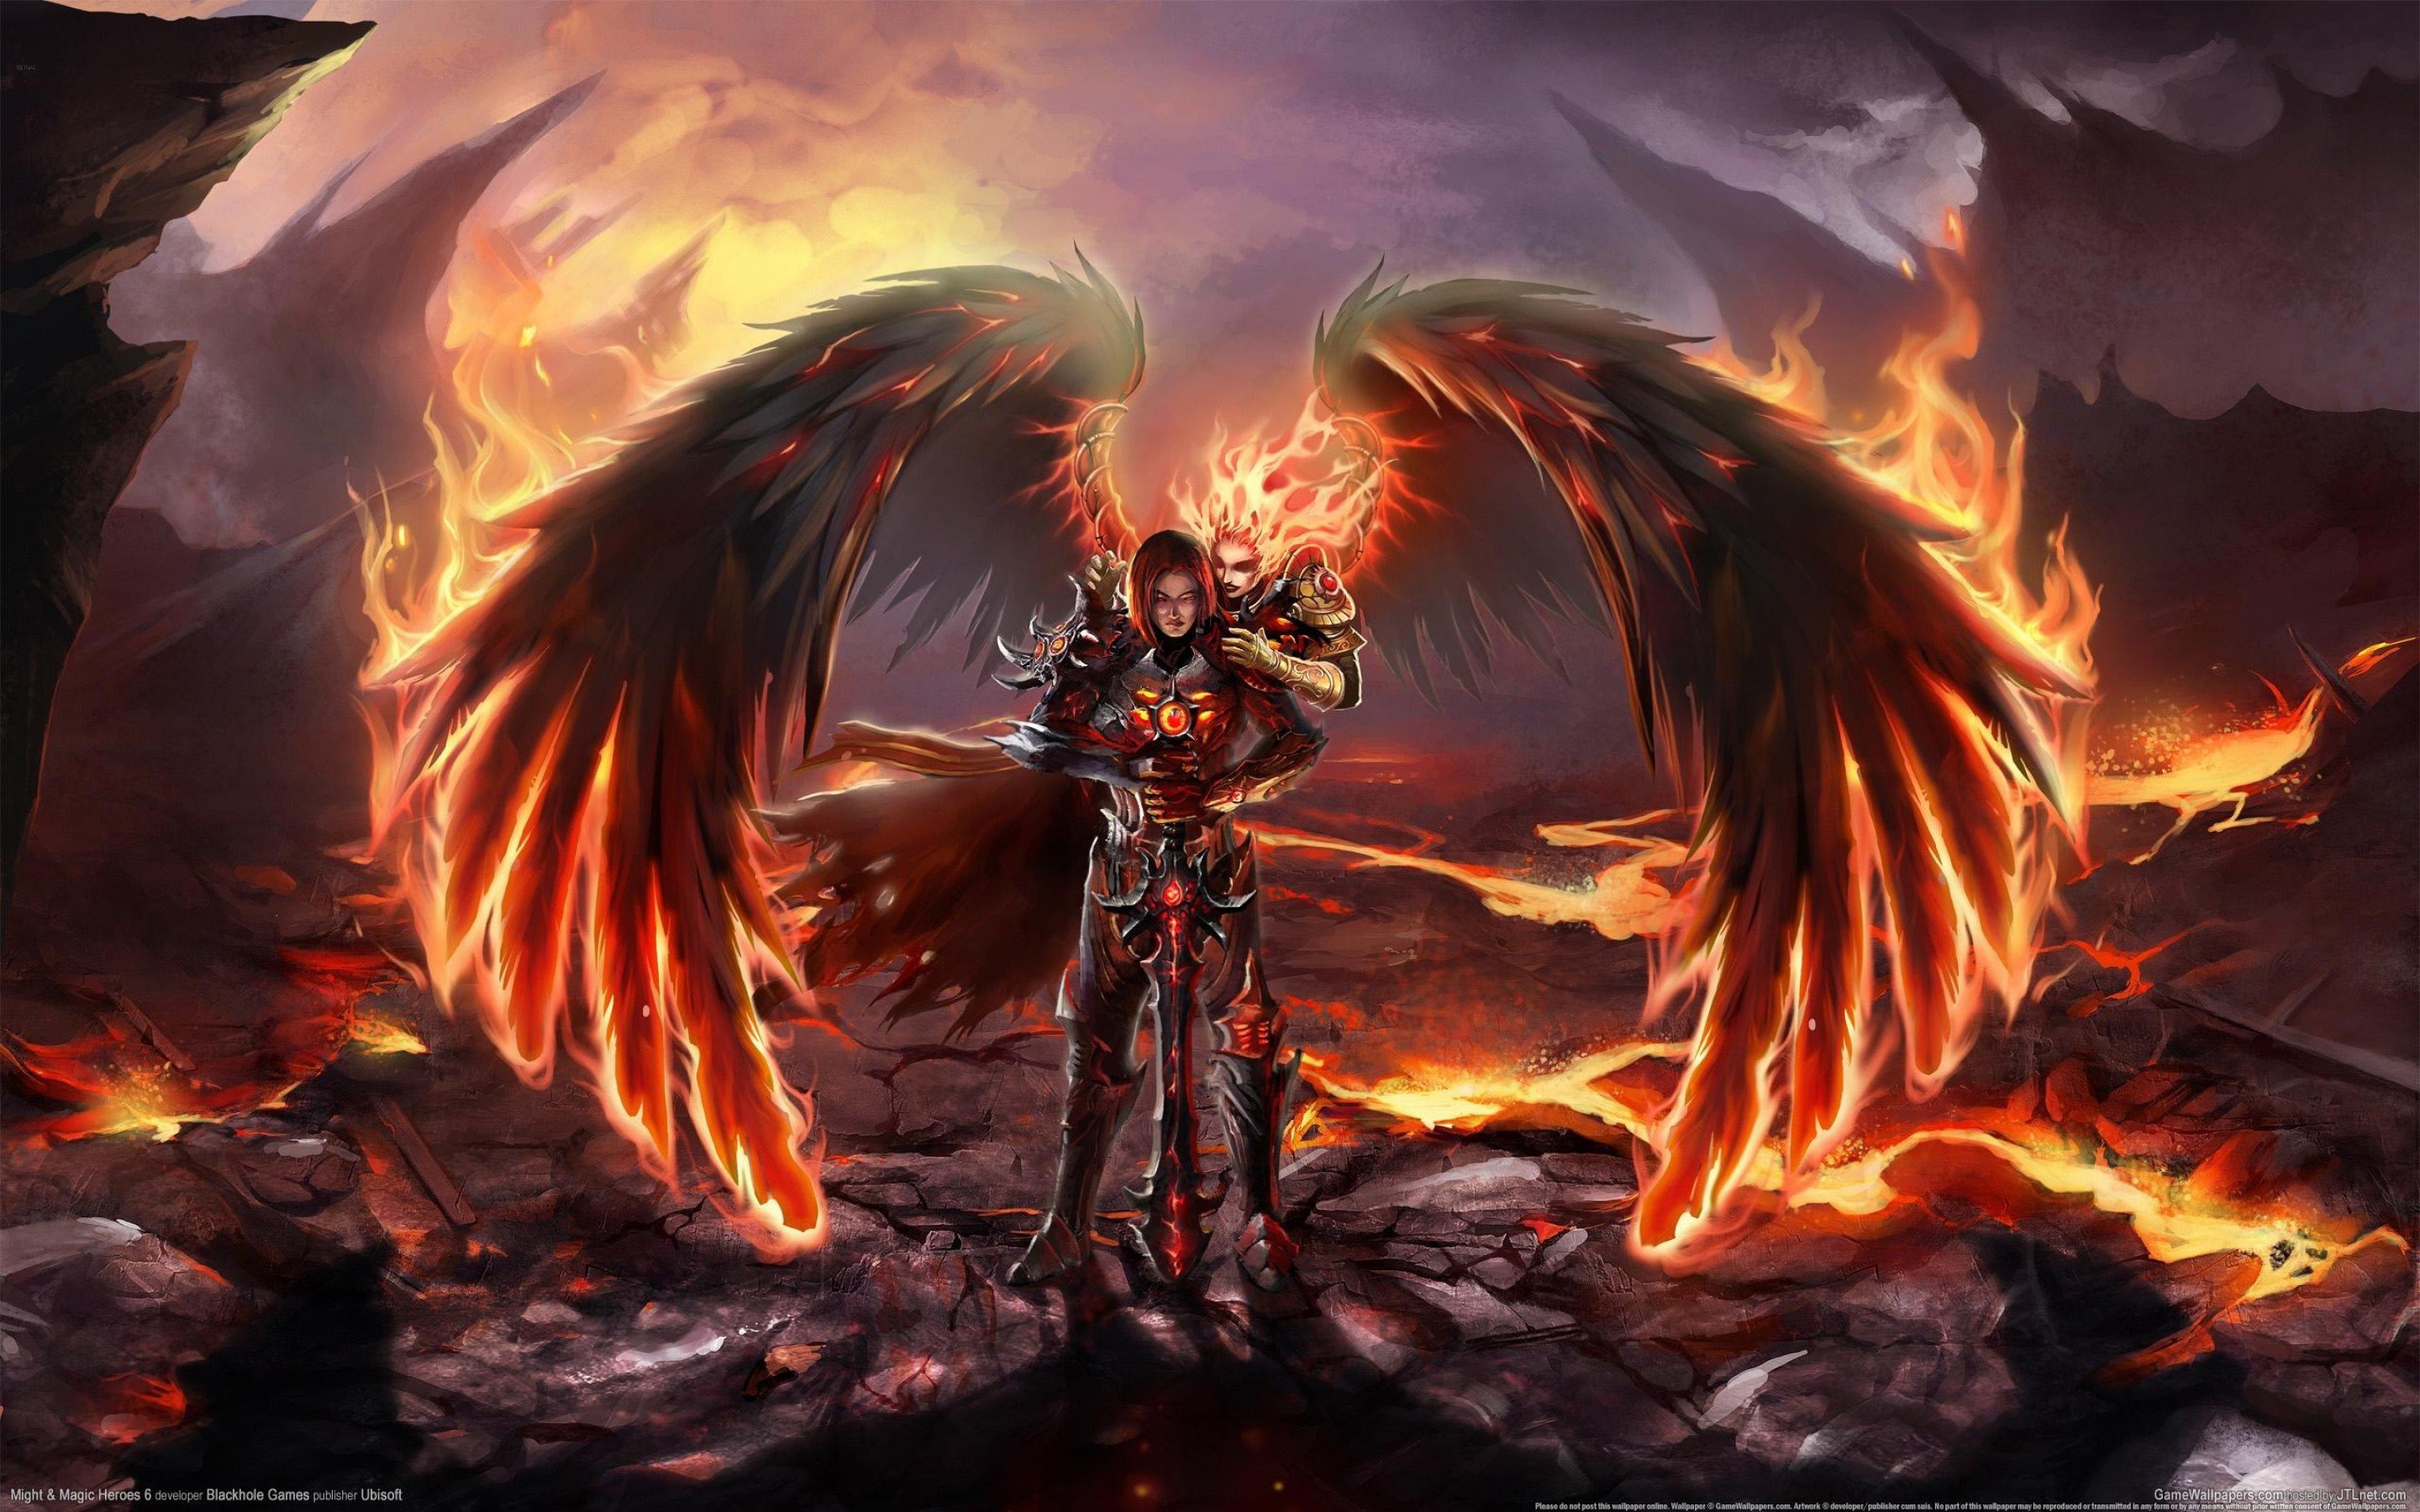 heroes, Might, Magic, Strategy, Fantasy, Fighting, Adventure, Action, Online, 1hmm, Warrior, Fire, Demon, Angel Wallpaper